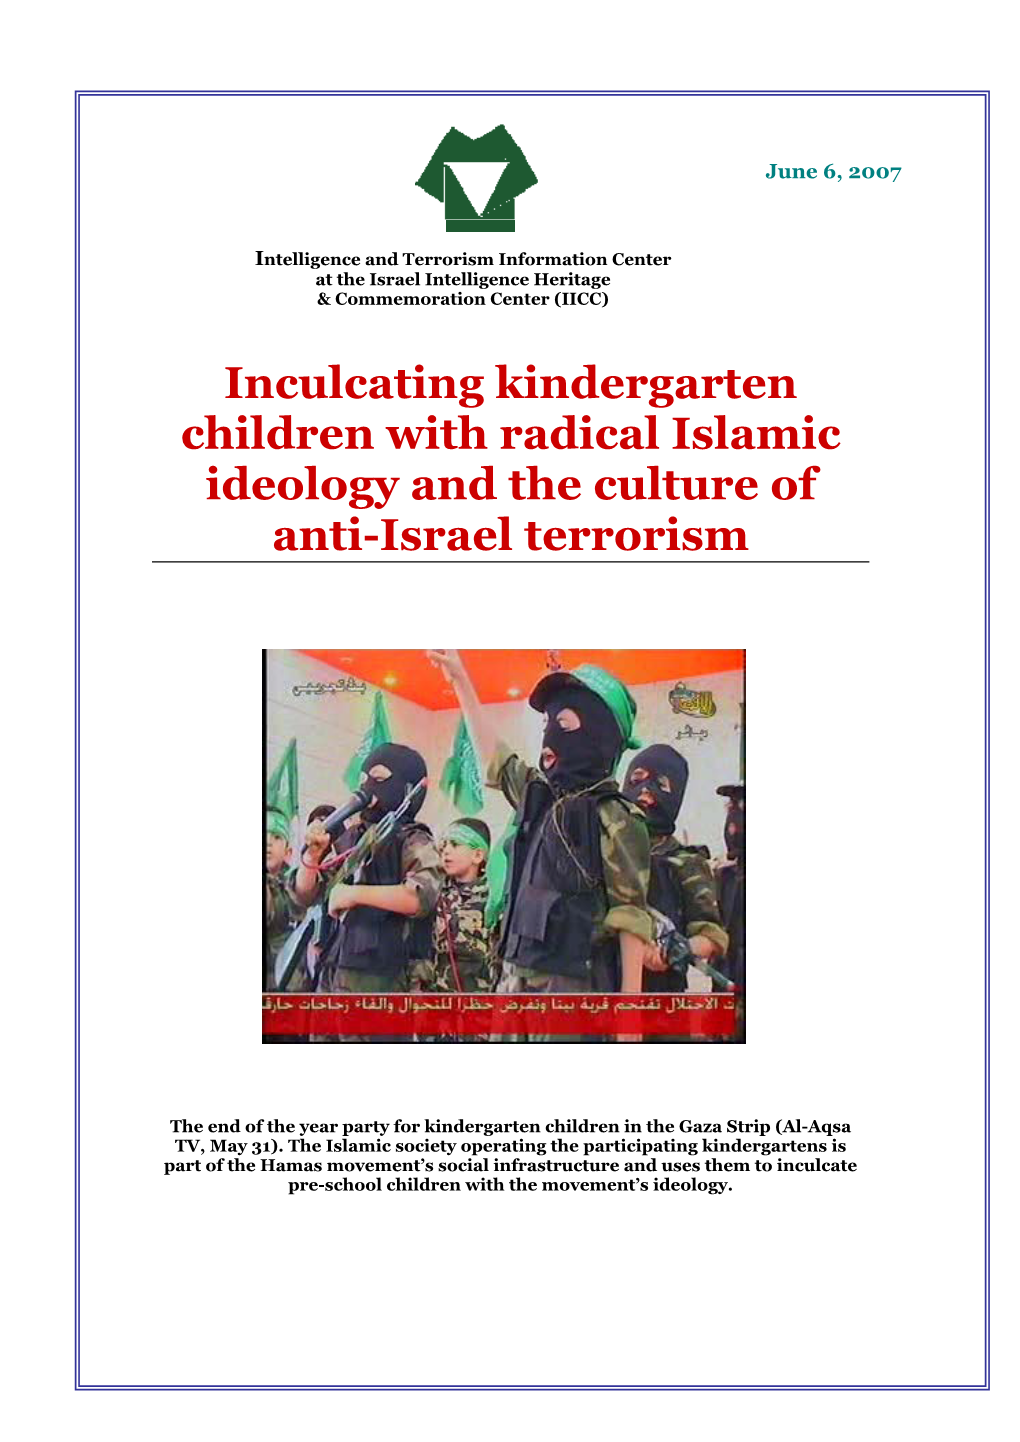 Inculcating Kindergarten Children with Radical Islamic Ideology and the Culture of Anti-Israel Terrorism